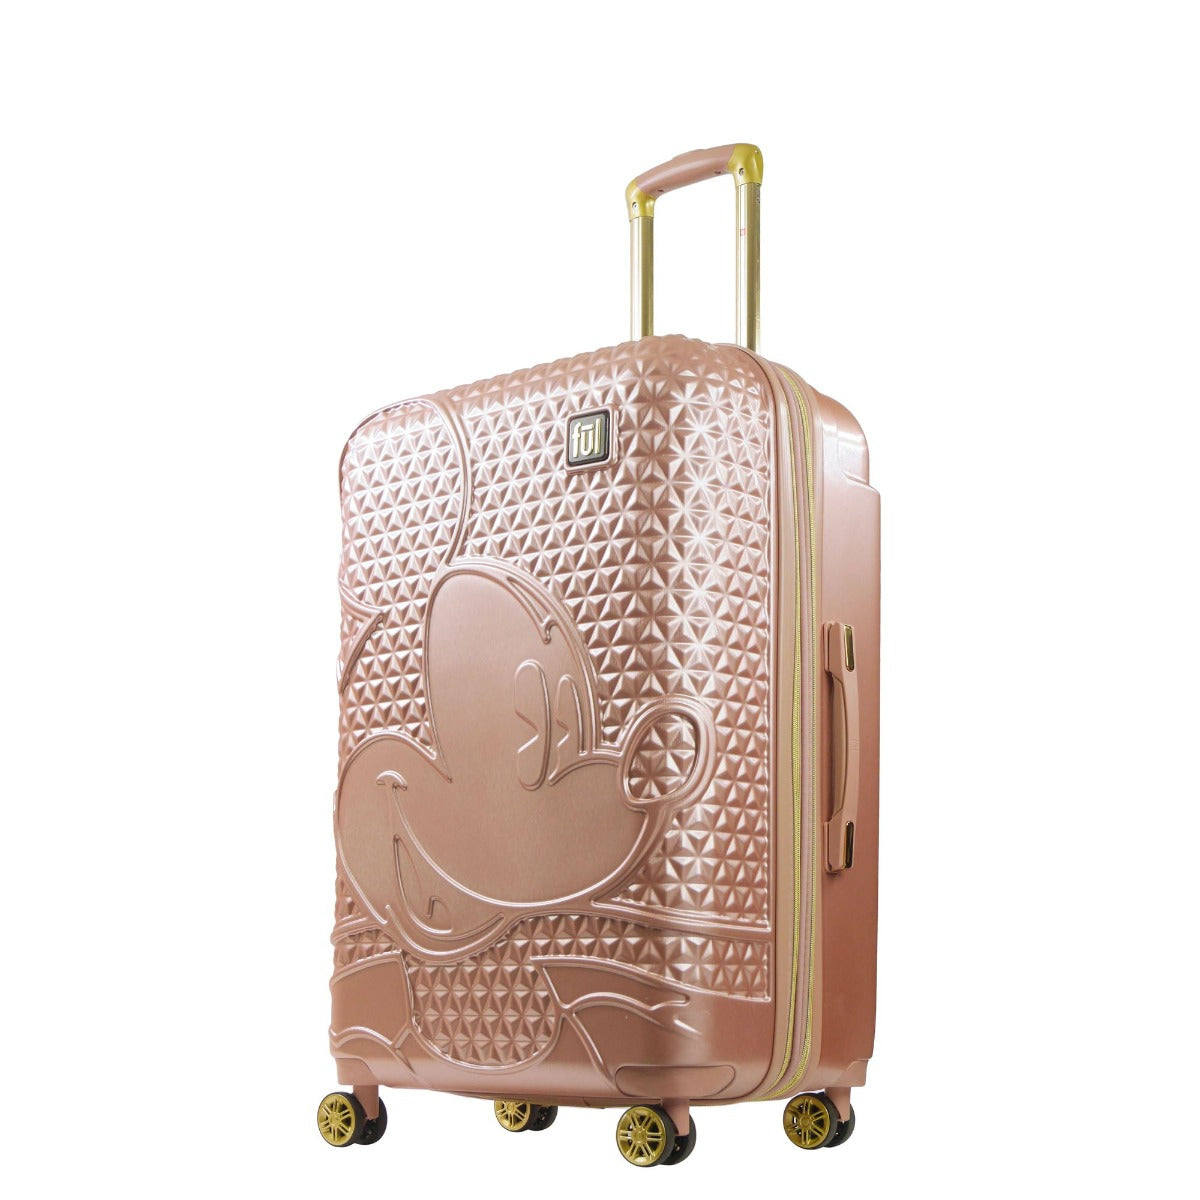 Ful Disney Textured Mickey Mouse 3-Piece 29 in., 25 in. and 21 in. Rose  Gold Hard-Sided Suitcases Luggage Set ECFC5005-715 - The Home Depot